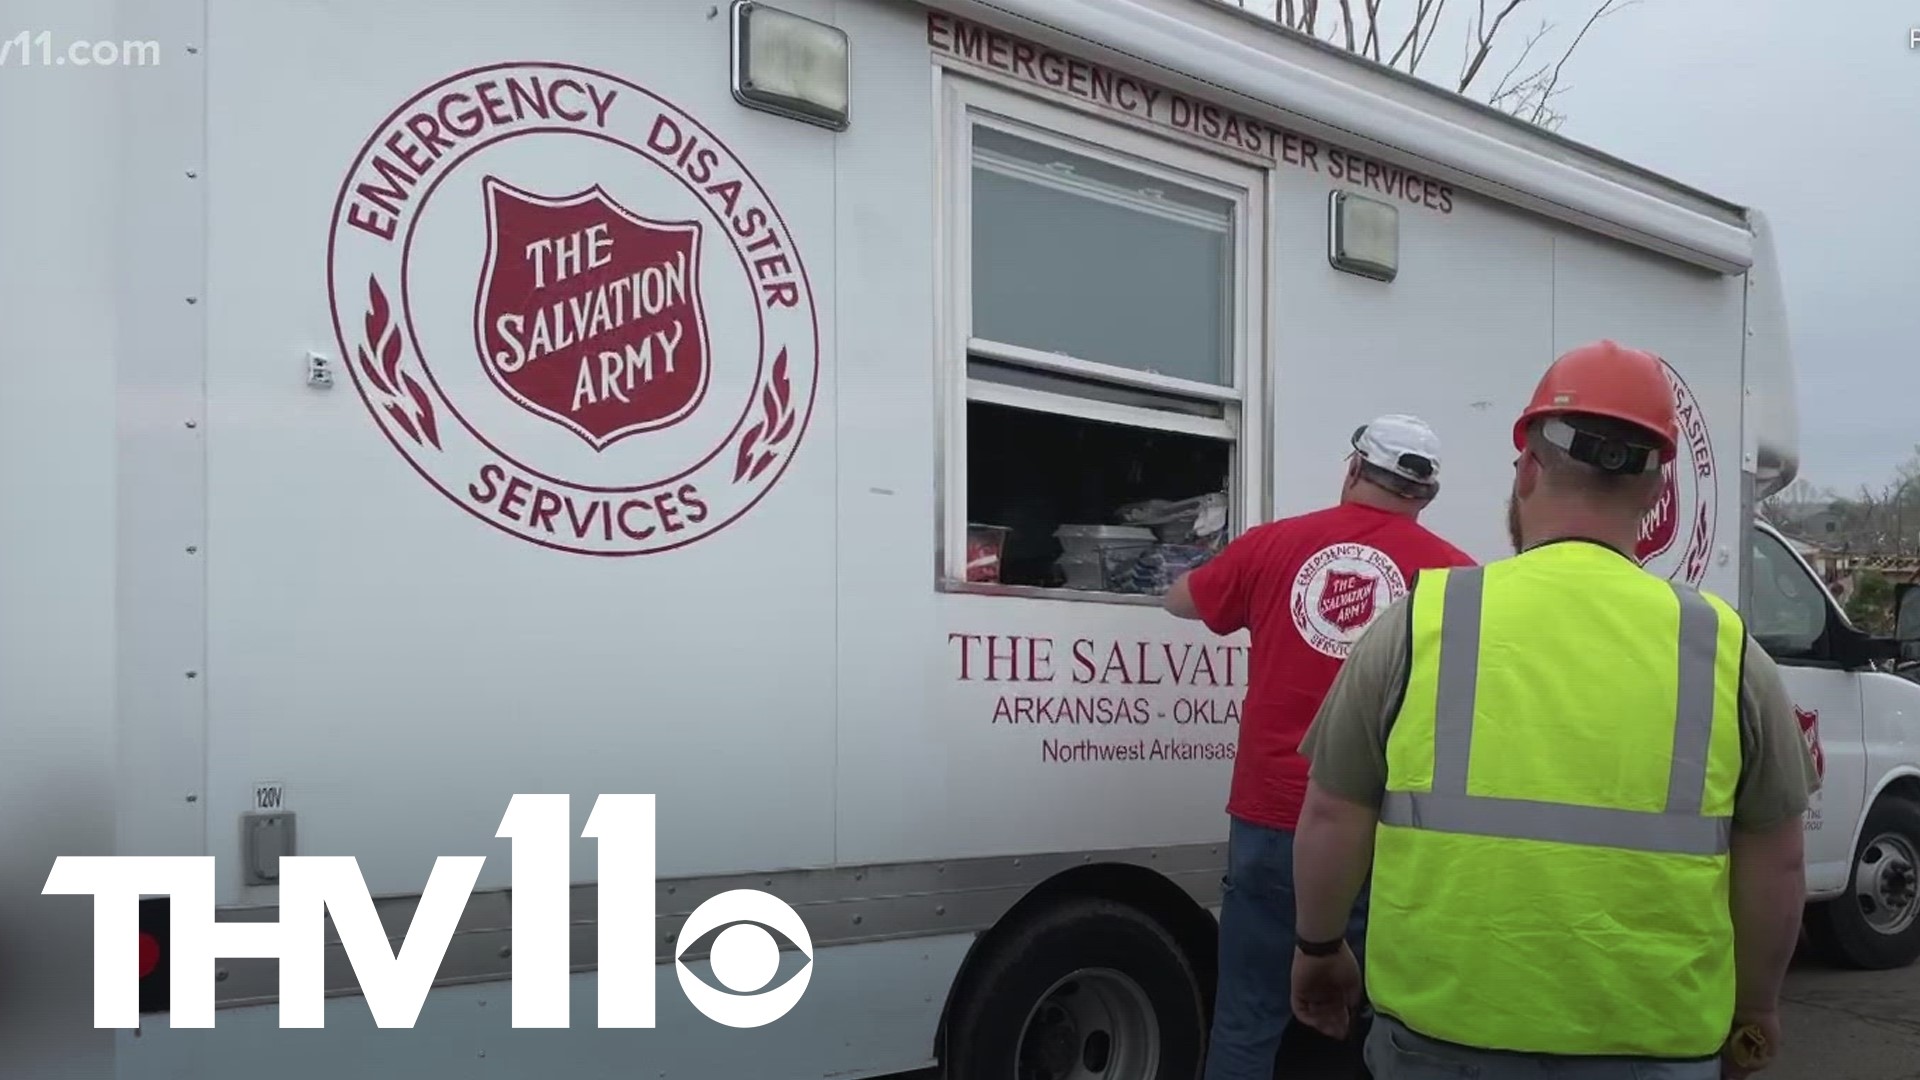 After the catastrophic tornado struck Arkansas last week, you may have been left wondering how you could help. One official with the Salvation Army tells us how.